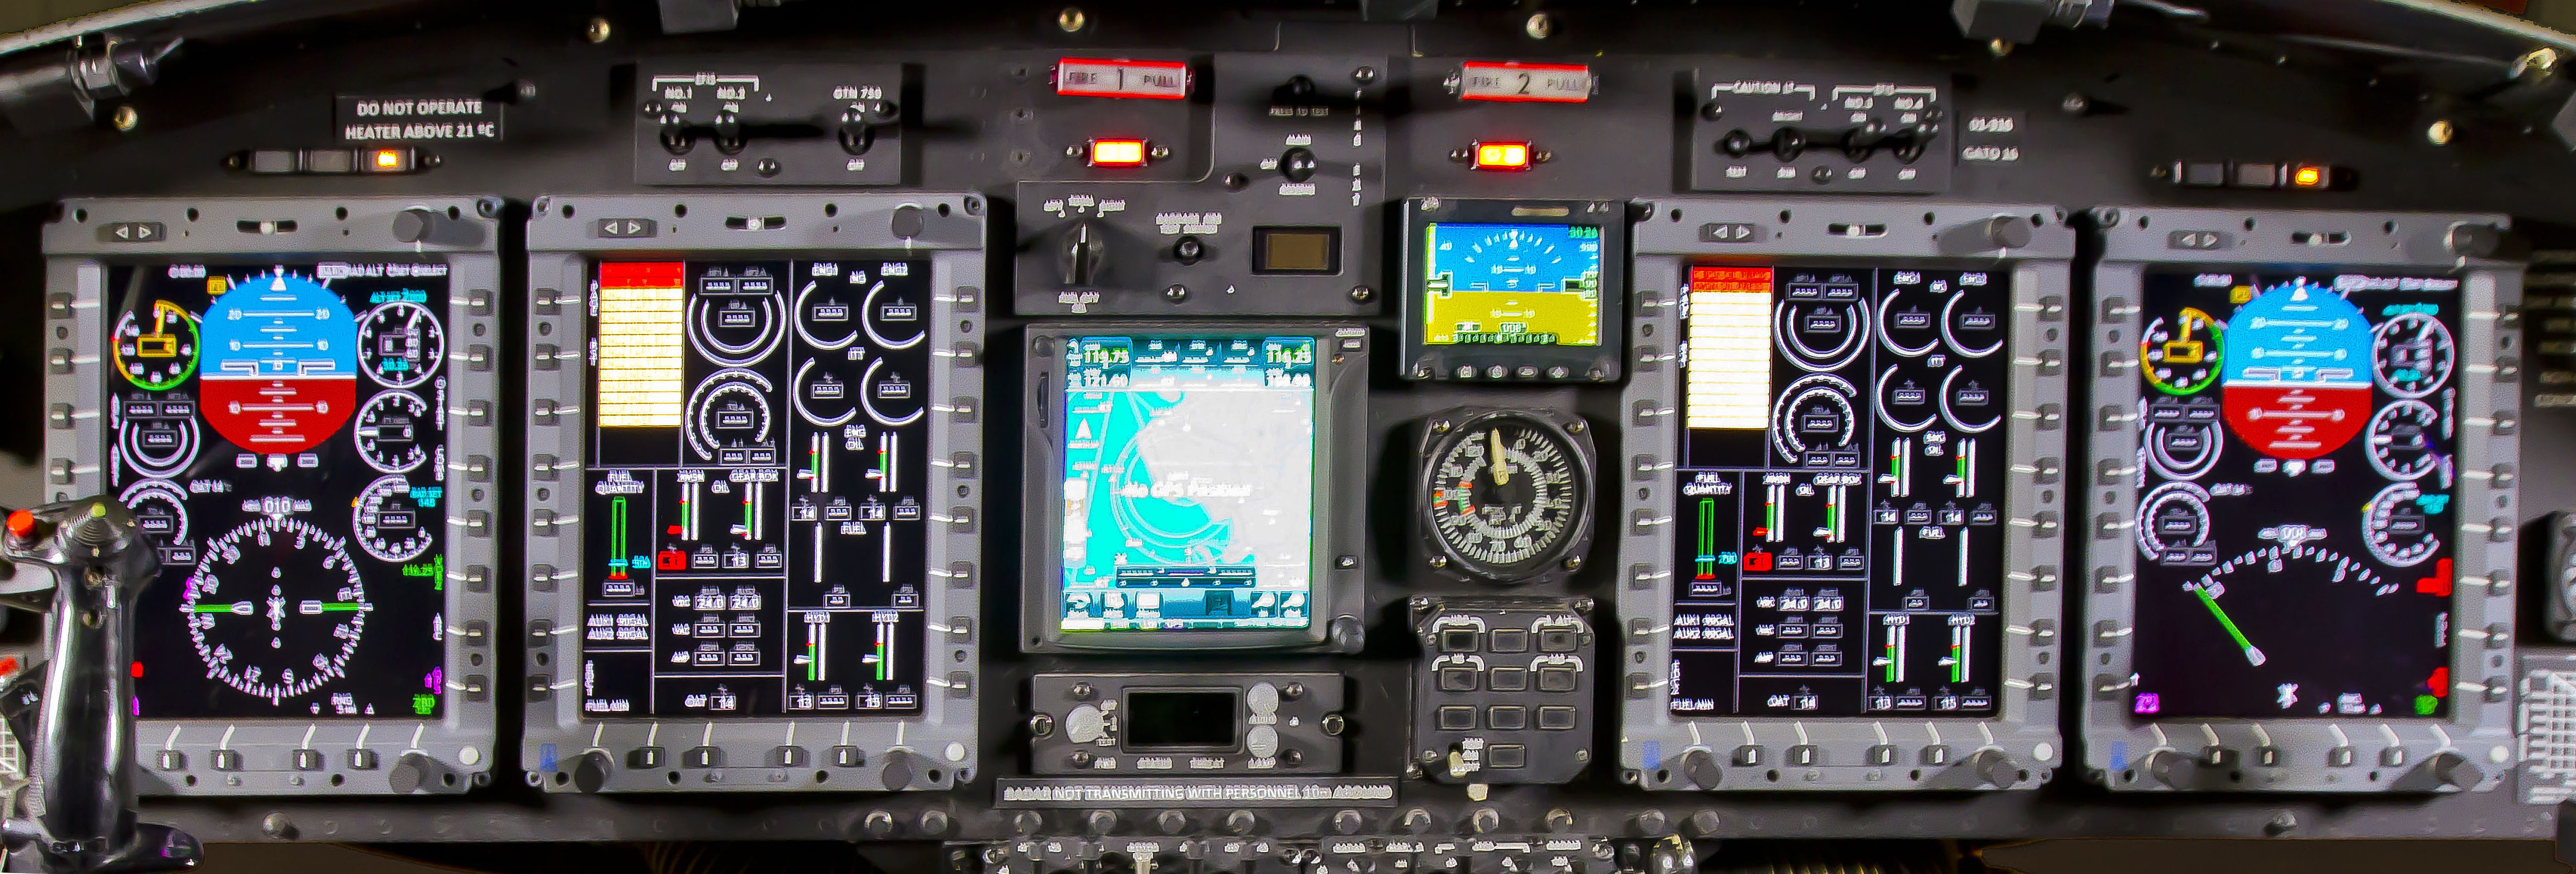 Astronautics’ multifunction display system (MFDS) is a key part of SENER-Babcock España’s avionics upgrade as part of the Spanish Navy’s AB-212 Helicopter Life Extension Program. Astronautics Photo